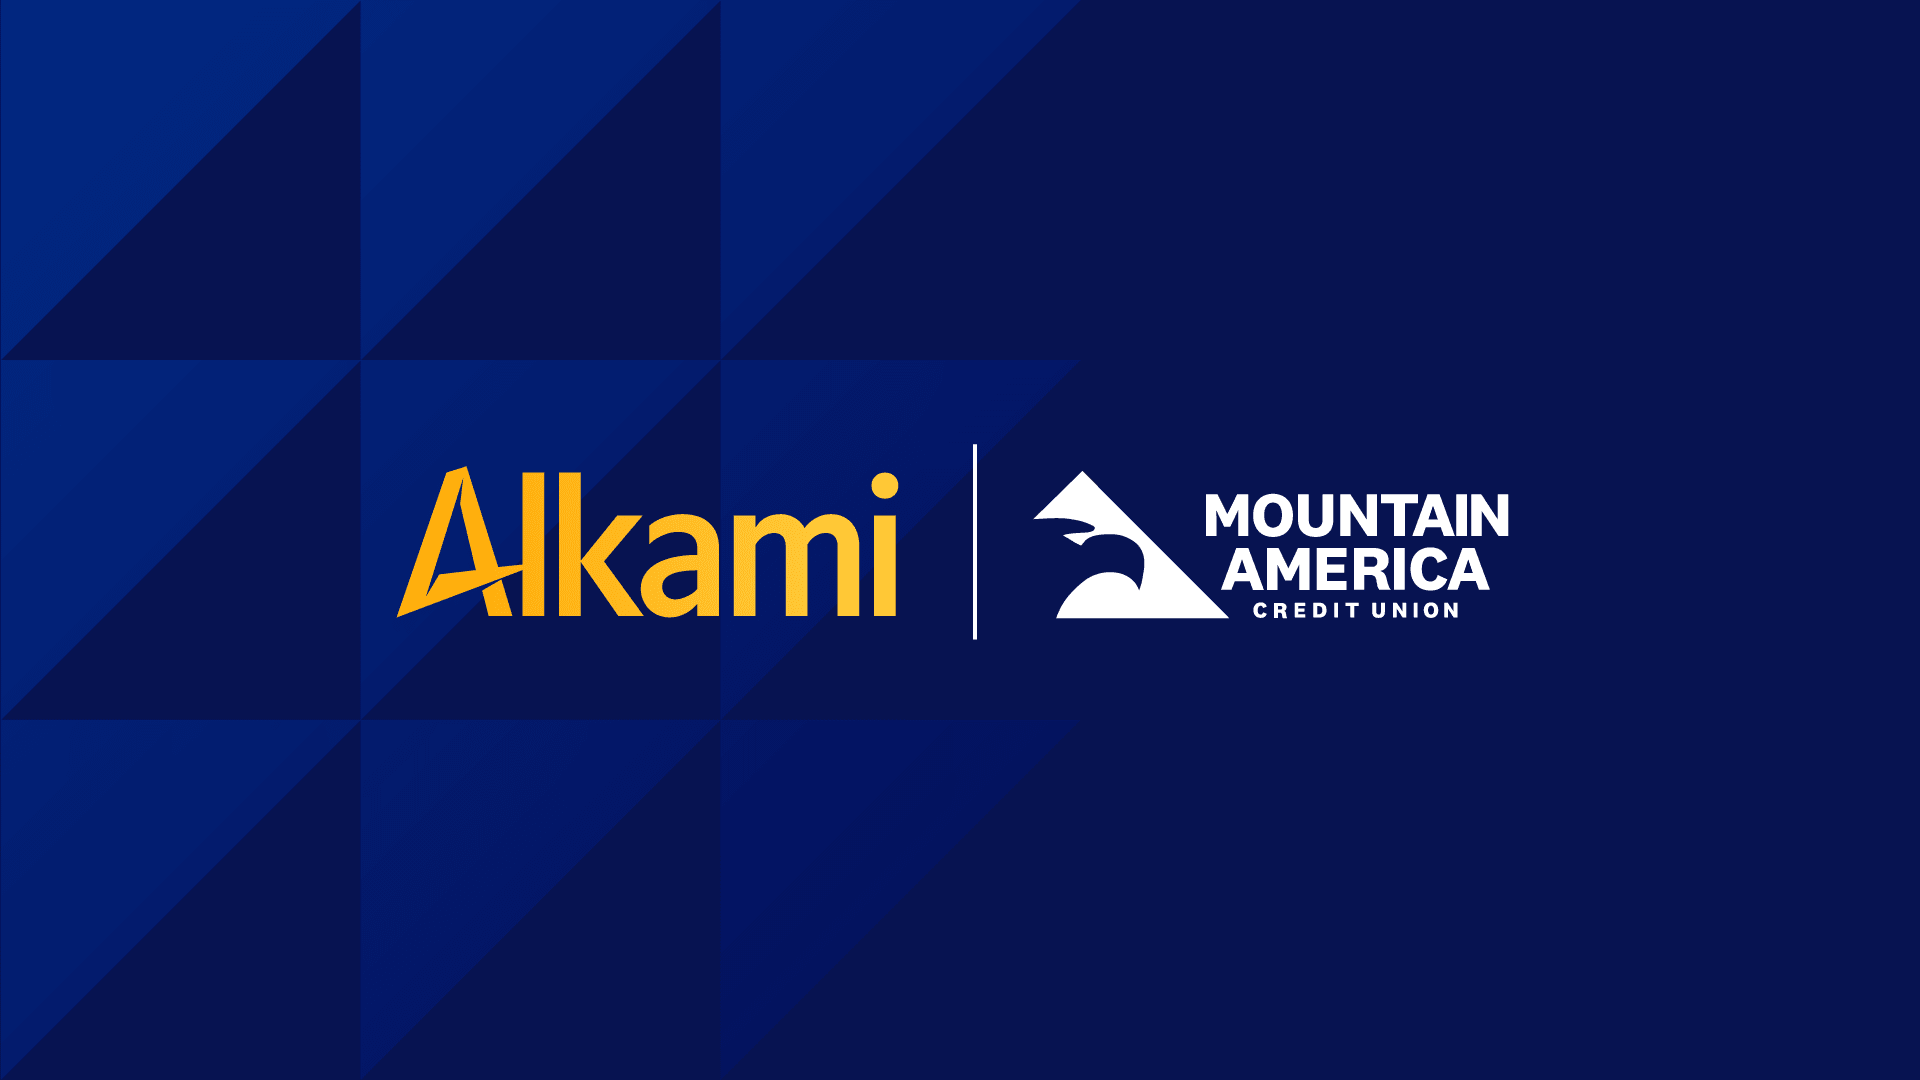 Top 10 Credit Union, Mountain America Credit Union, Extends Partnership with Alkami Technology